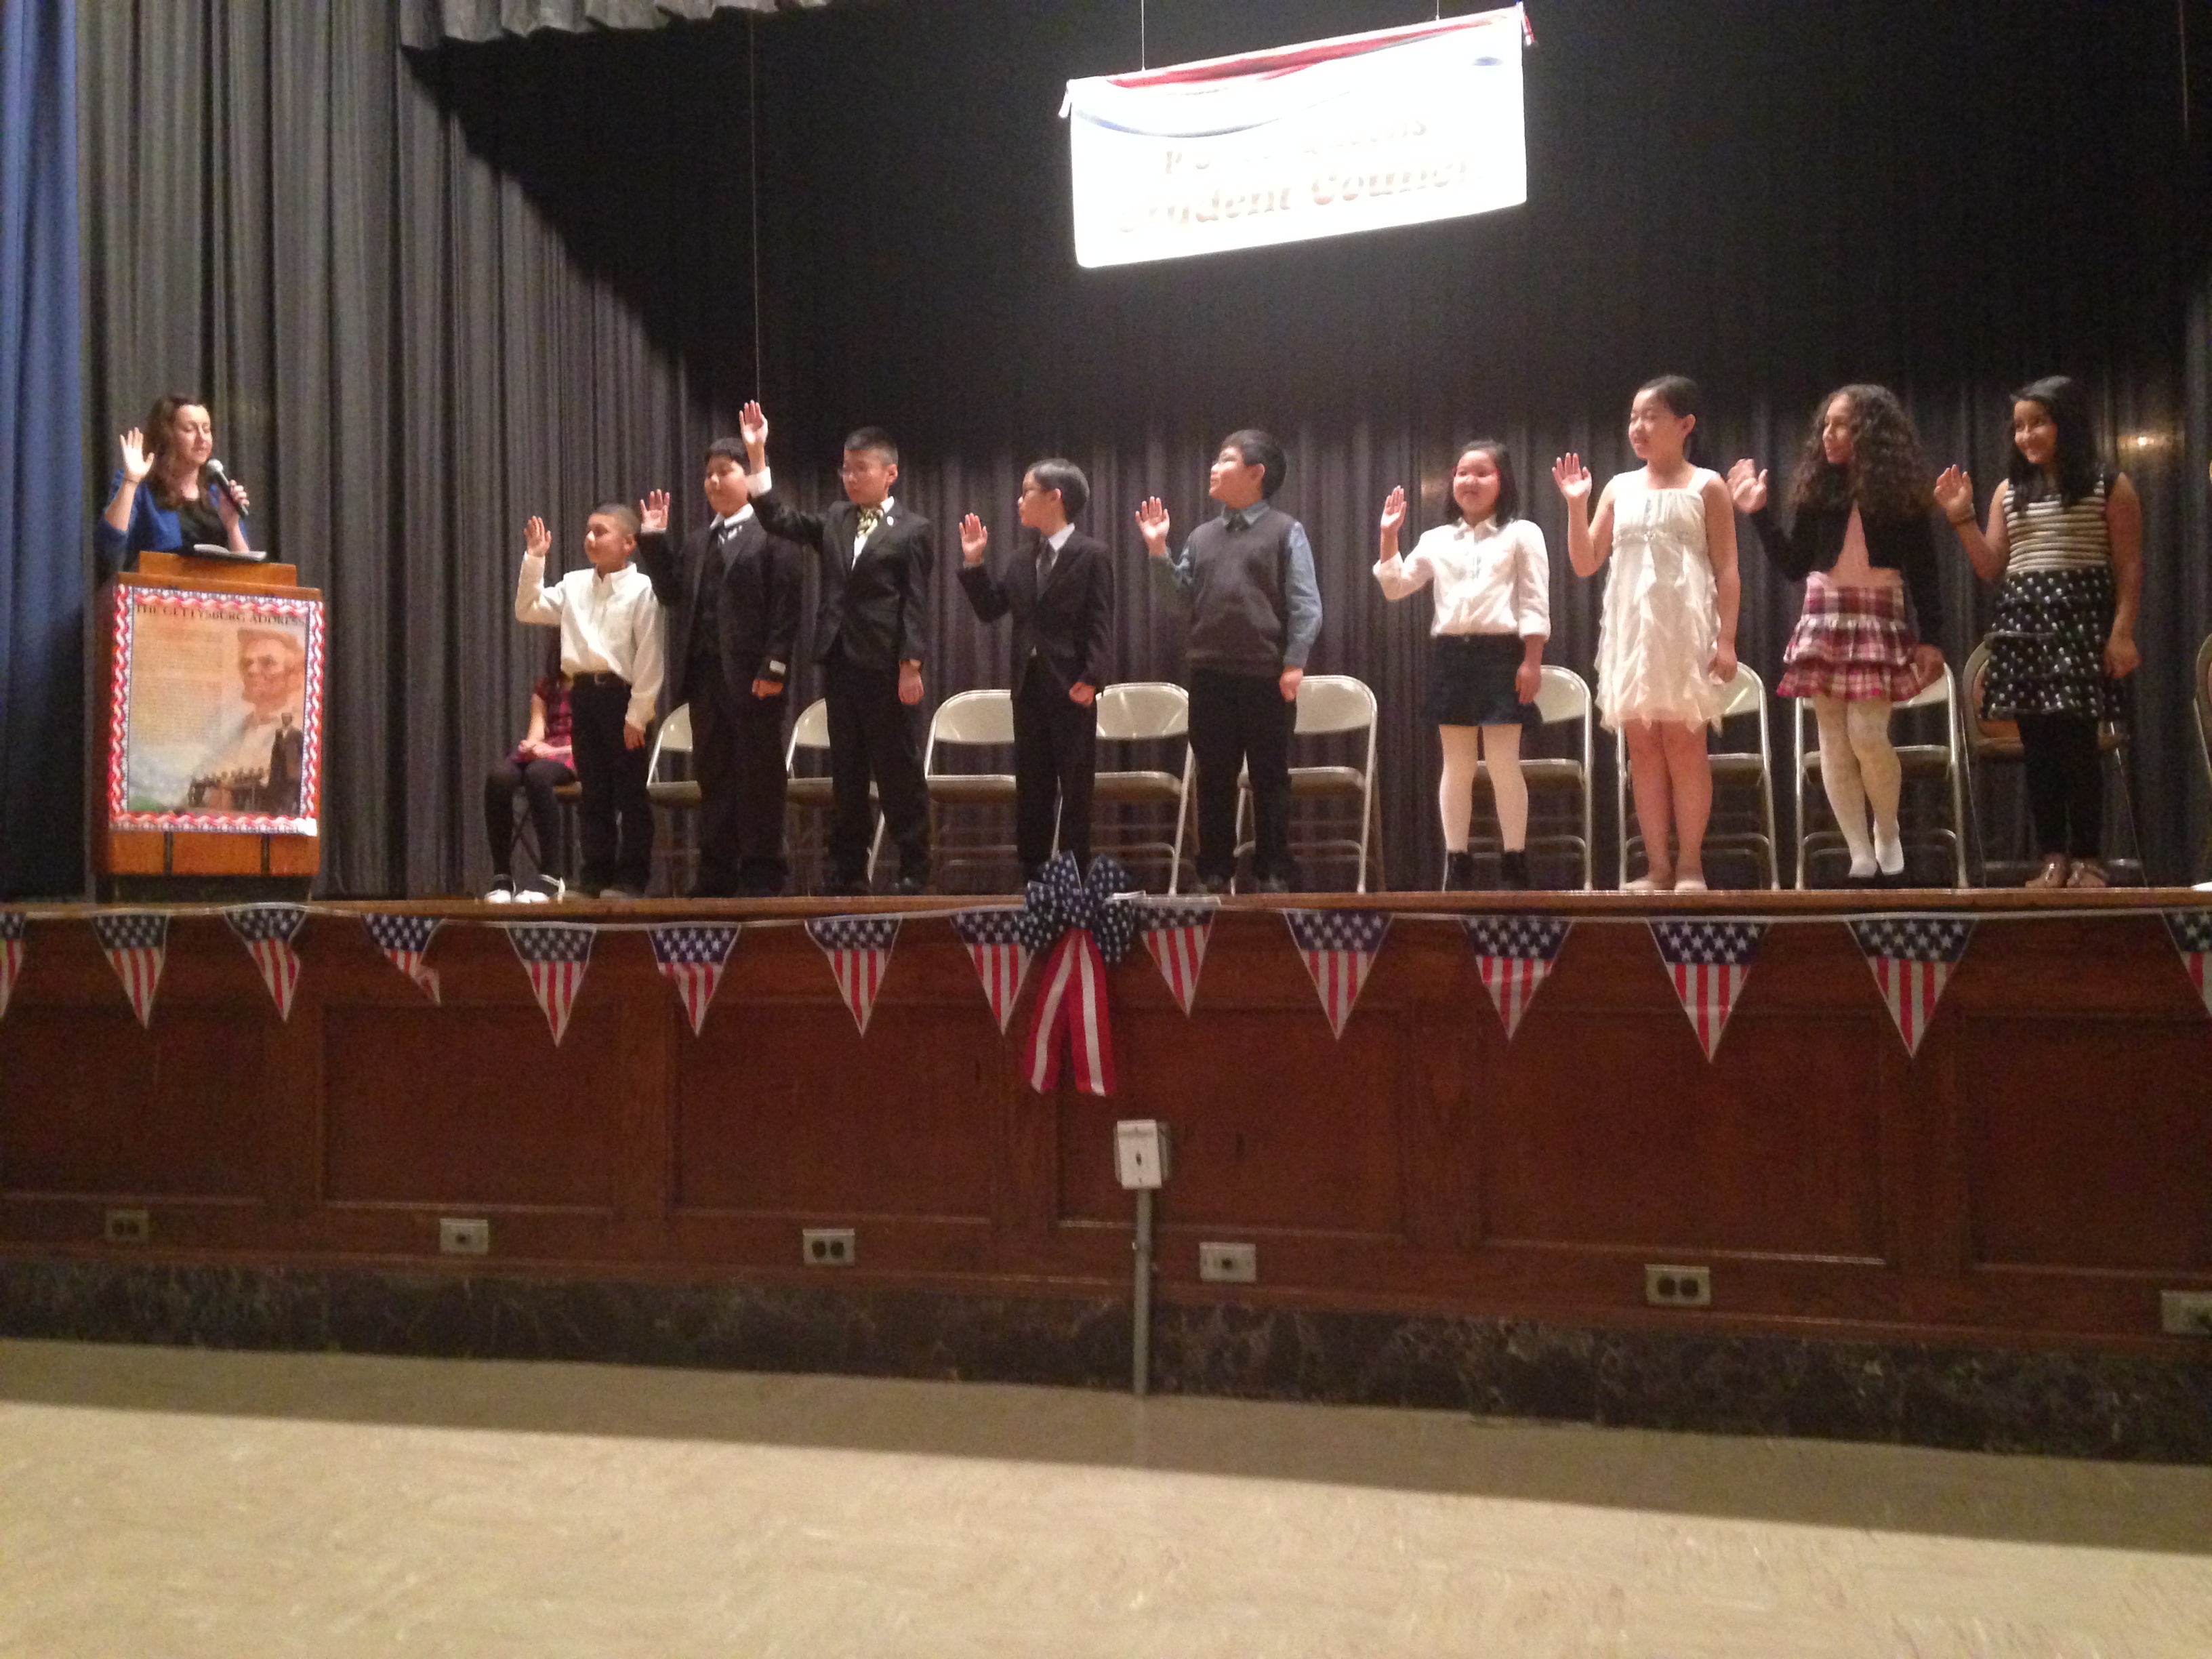 Assemblywoman Nily Rozic installed new officers of the student government at P.S. 26 Rufus King in Fresh Meadows.